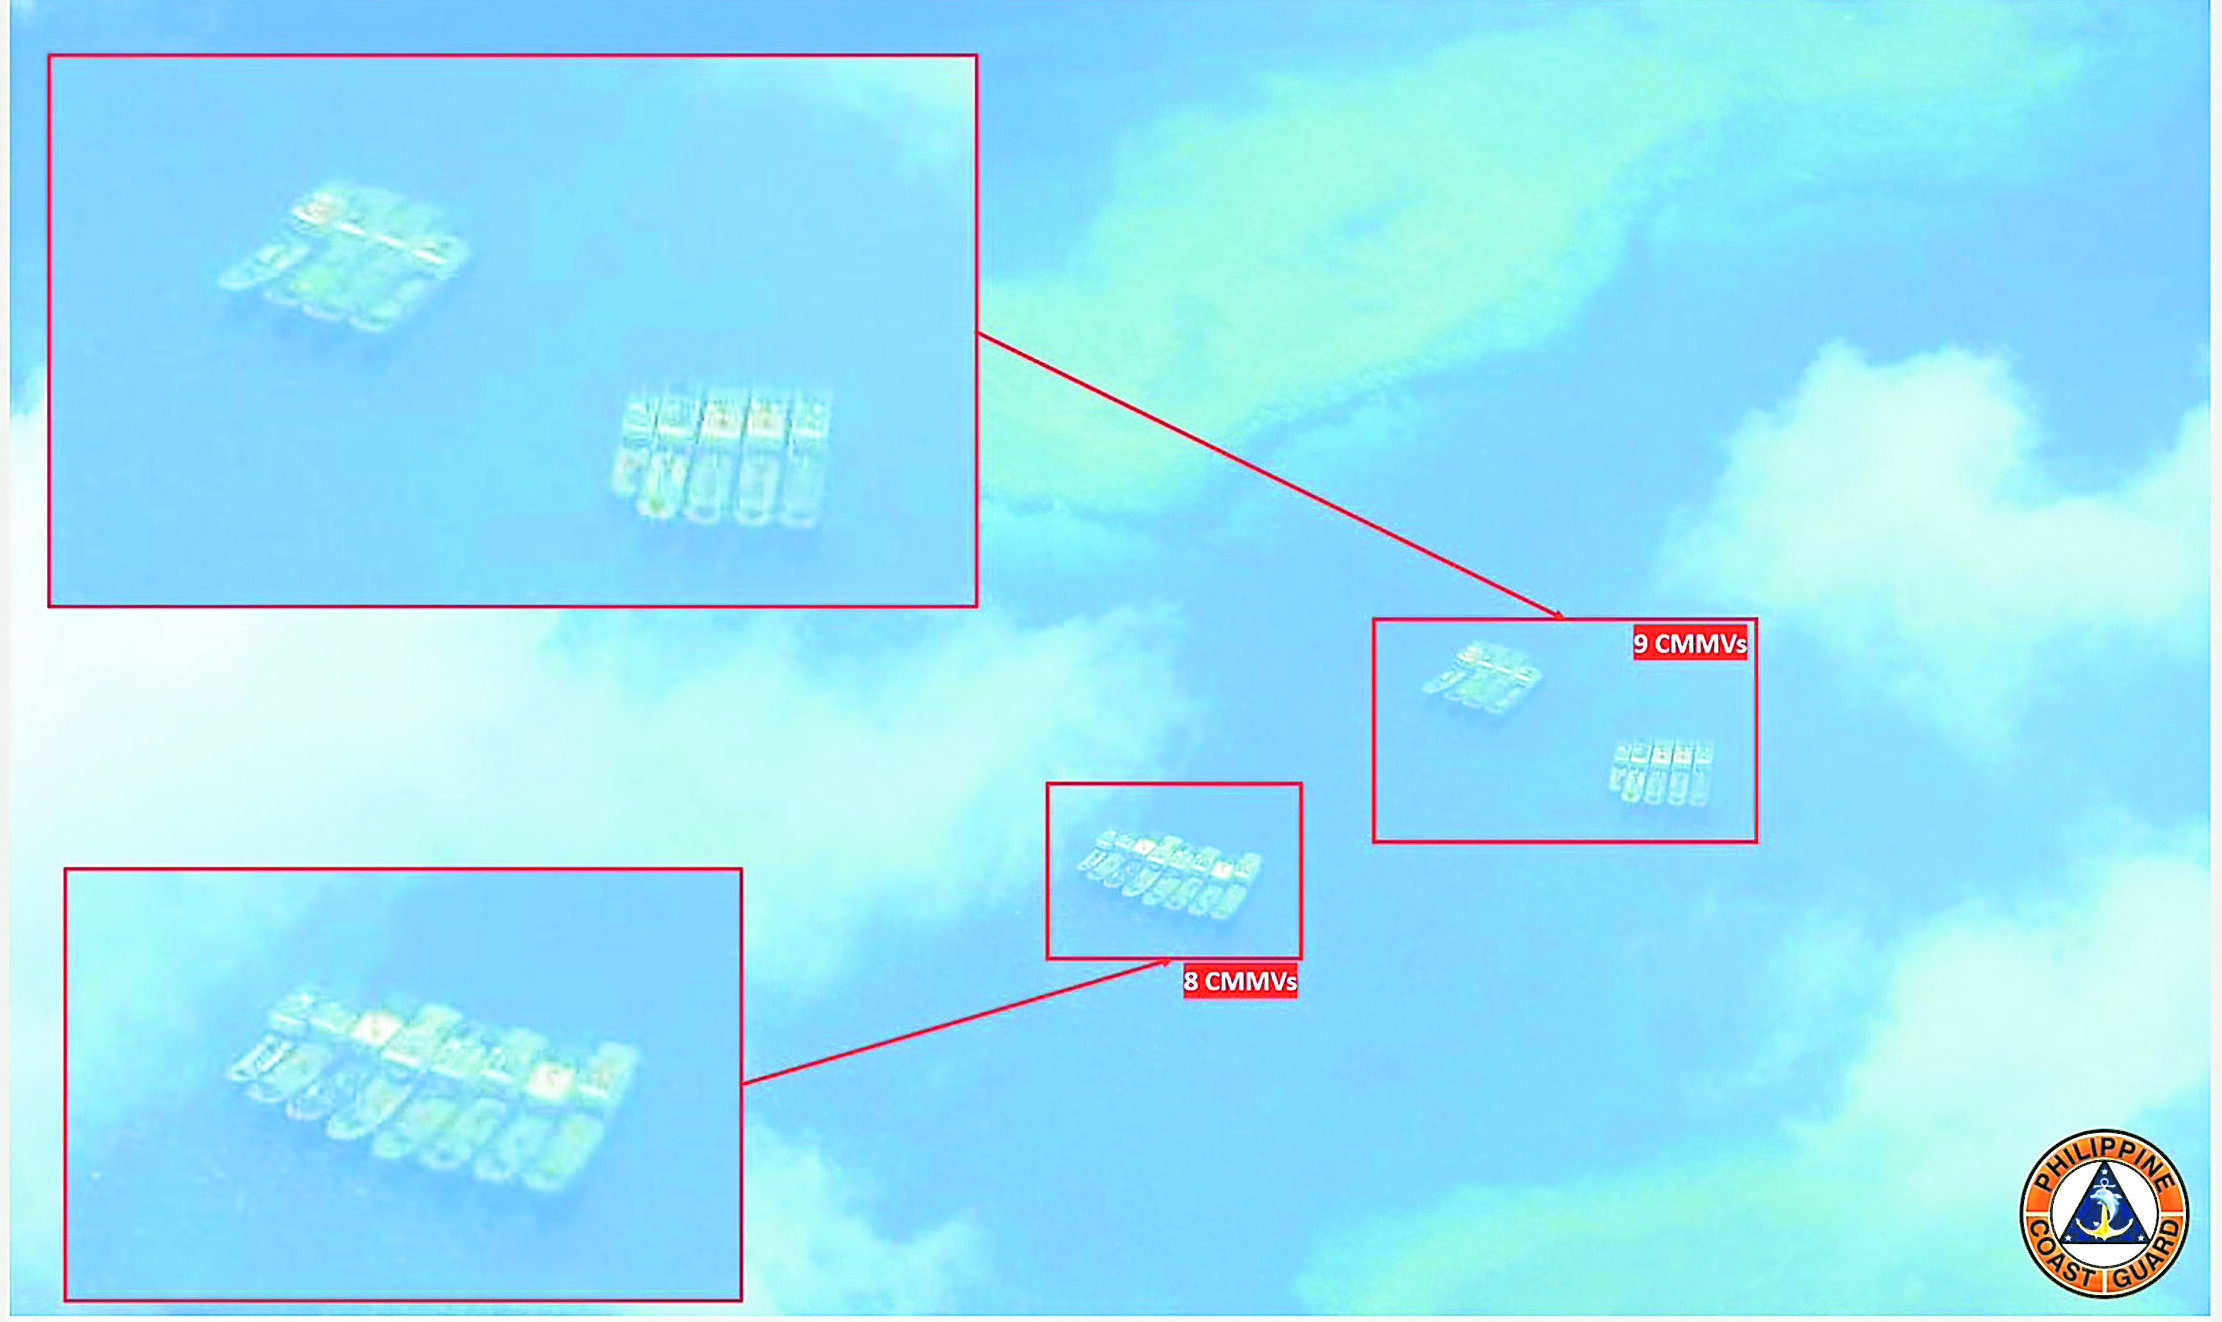 A Philippine Coast Guard aerial patrol over the West Philippine Sea found fewer Chinese vessels than previously observed, such as these clusters of suspected Chinese maritime militia vessels off Escoda (Sabina) Shoal.